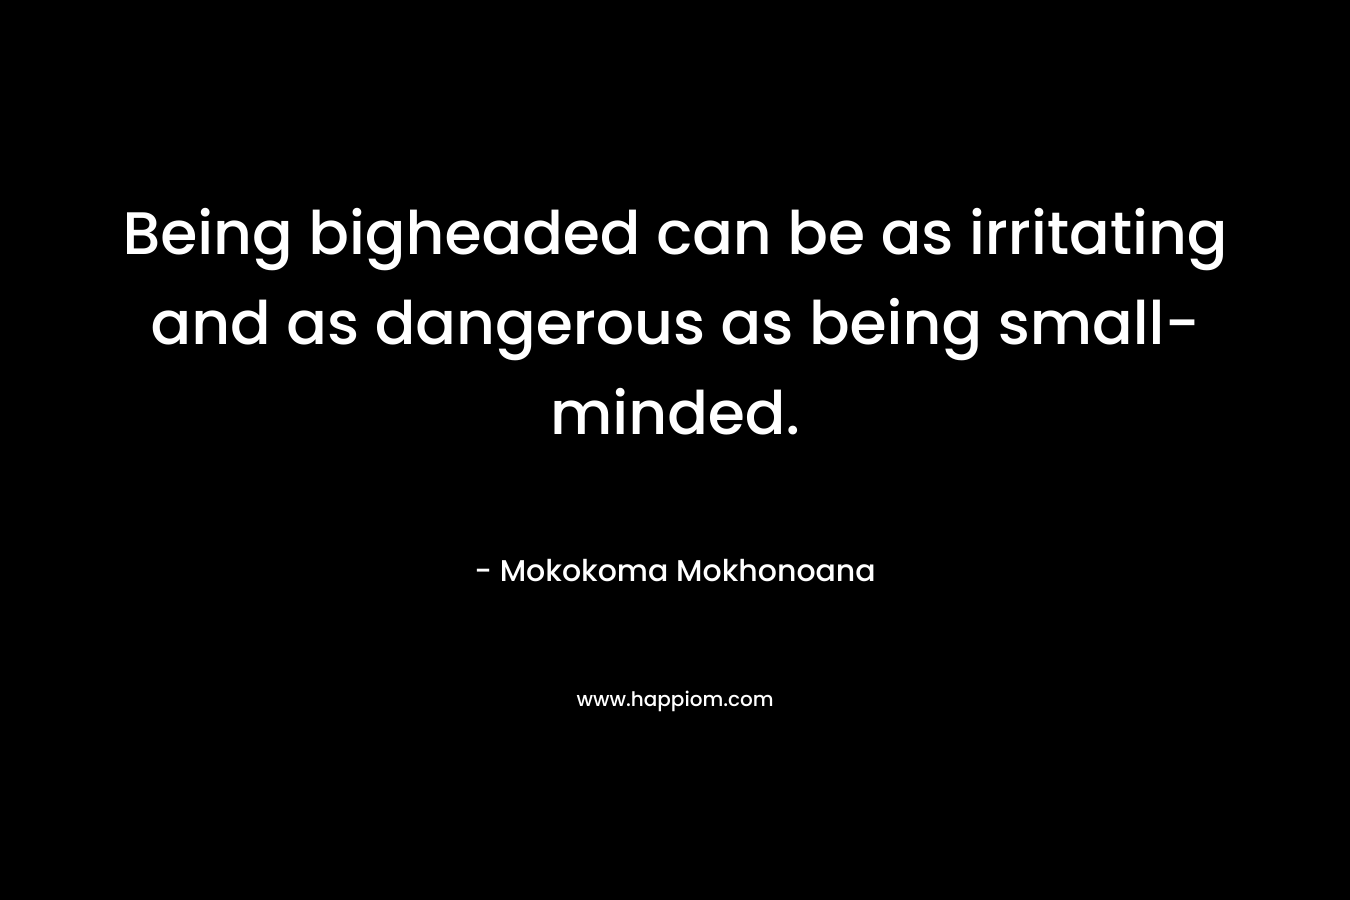 Being bigheaded can be as irritating and as dangerous as being small-minded.